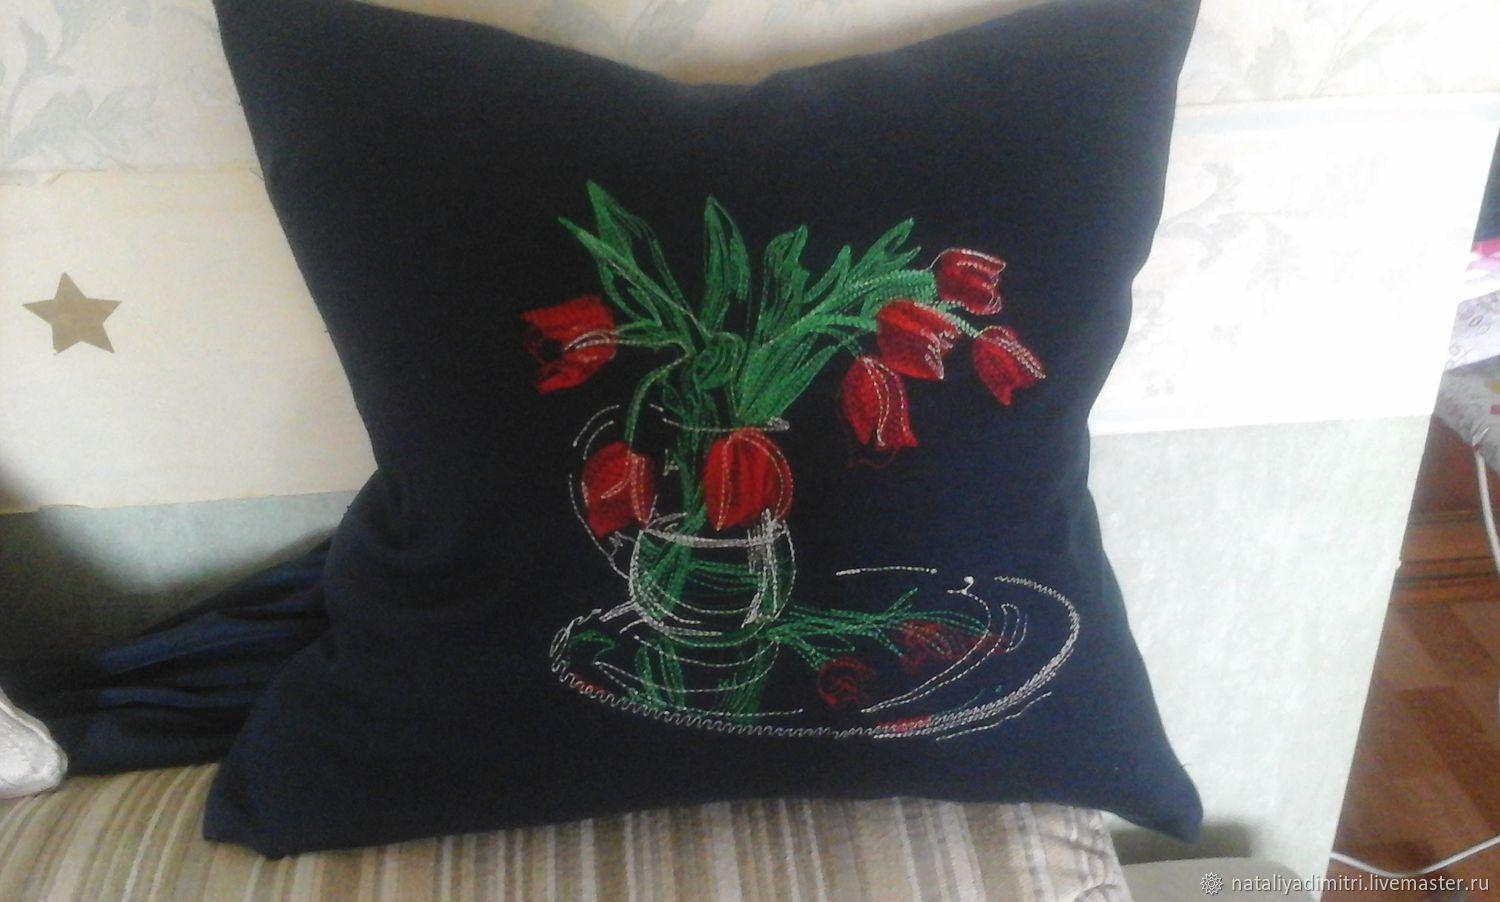 Embroidered cushion with tulips in vase free design